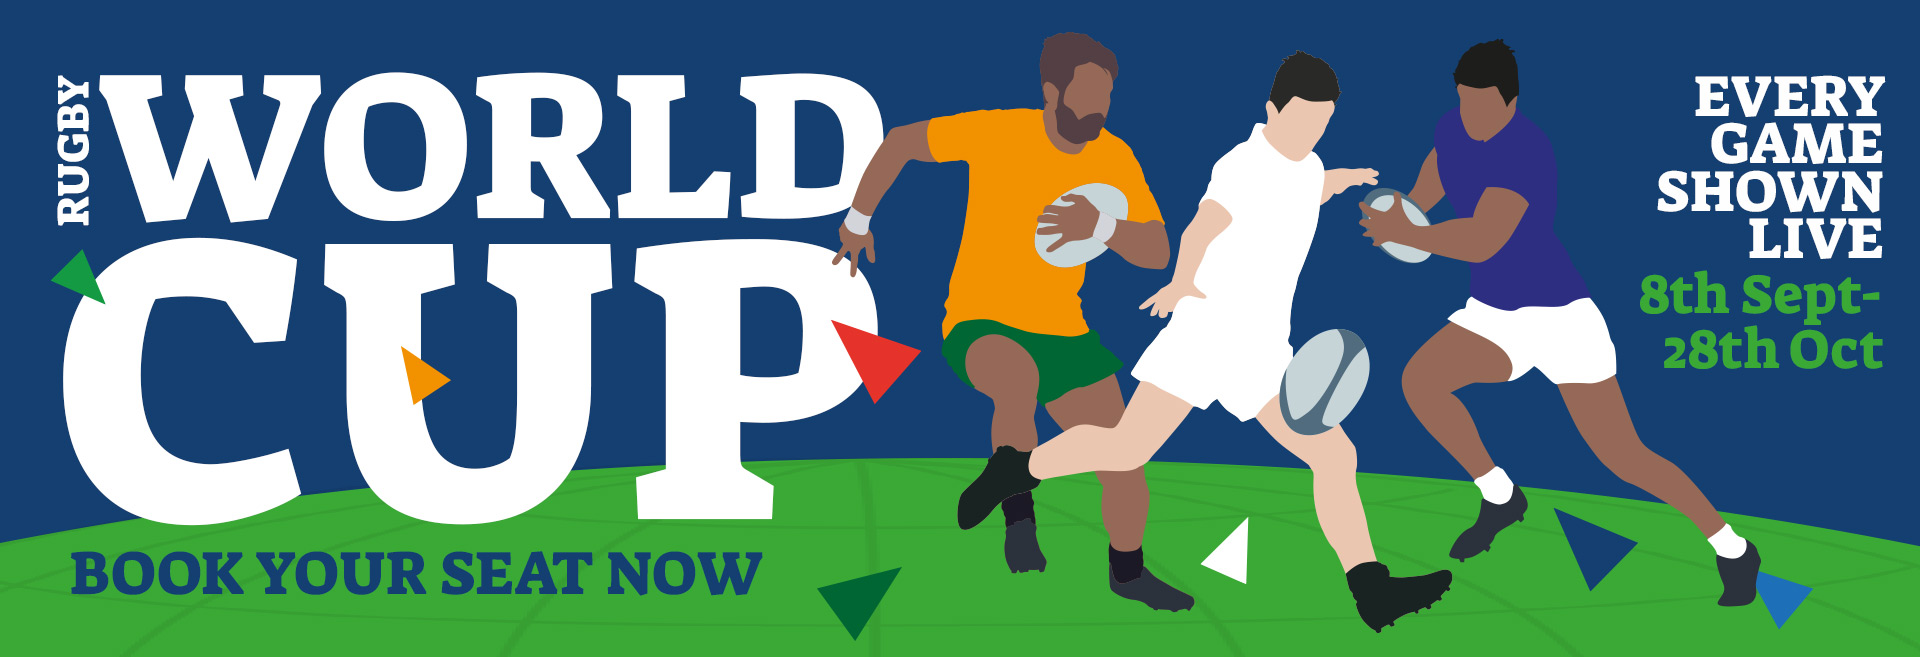 Watch the Rugby World Cup at The Edinboro Castle